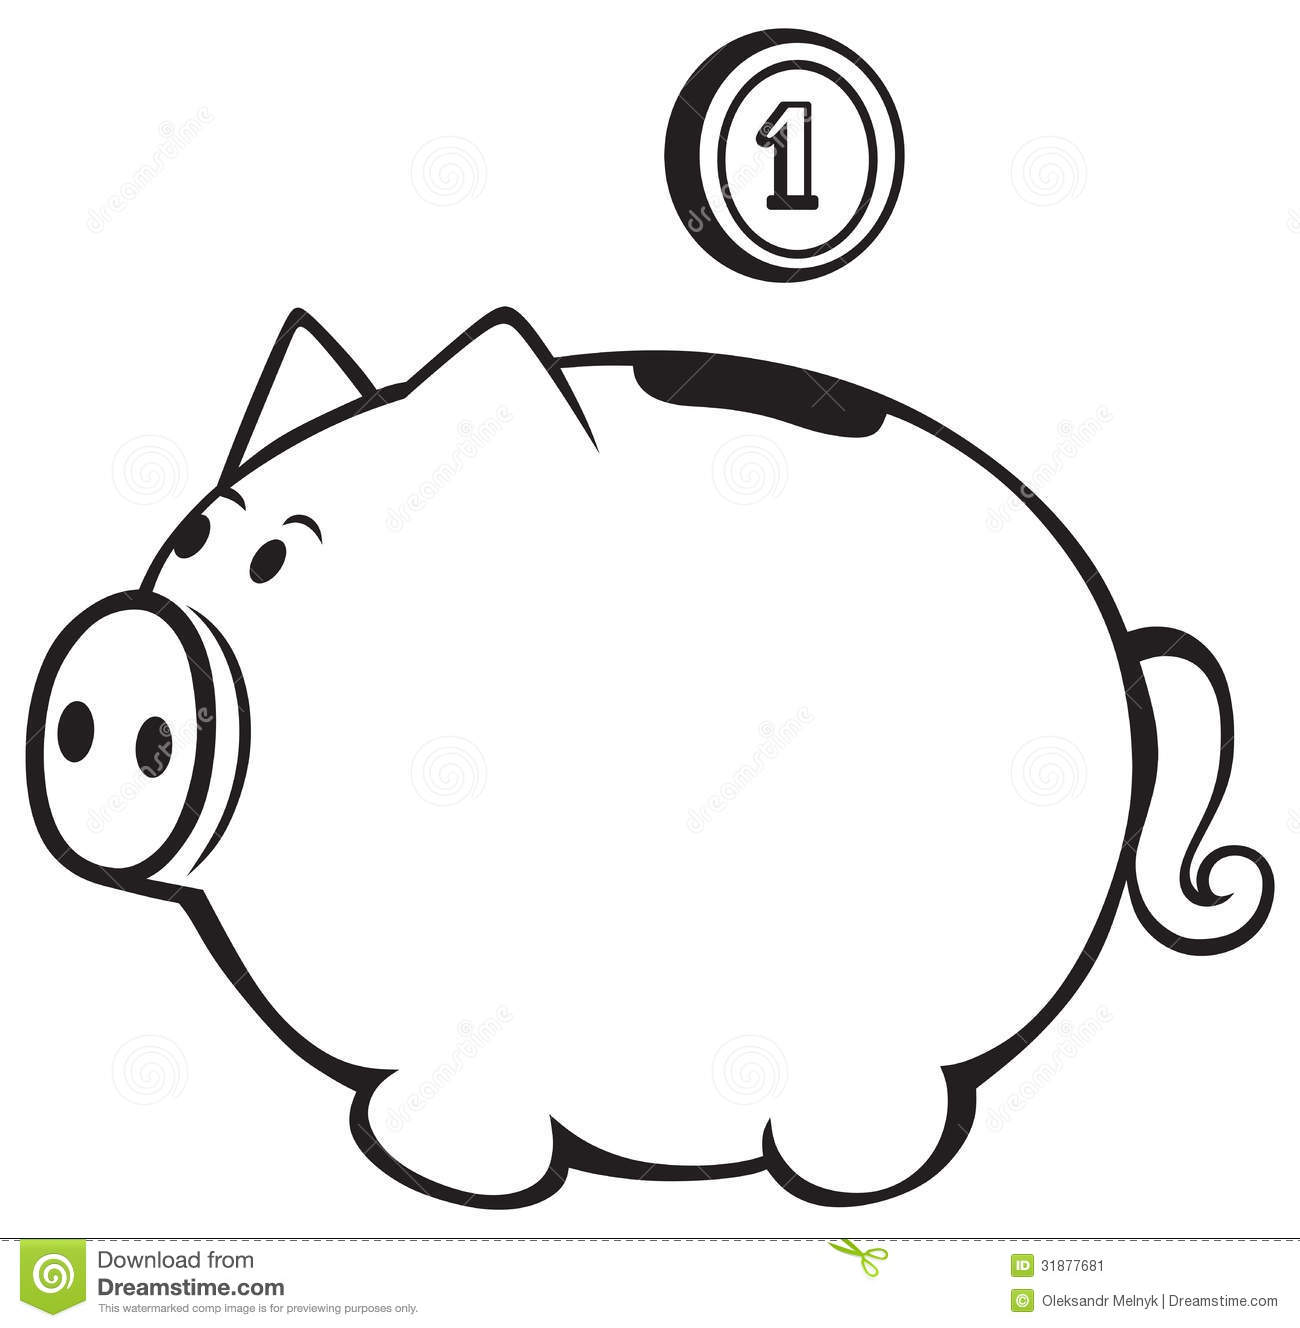 Free Piggy Bank Black And White, Download Free Piggy Bank Black And ...